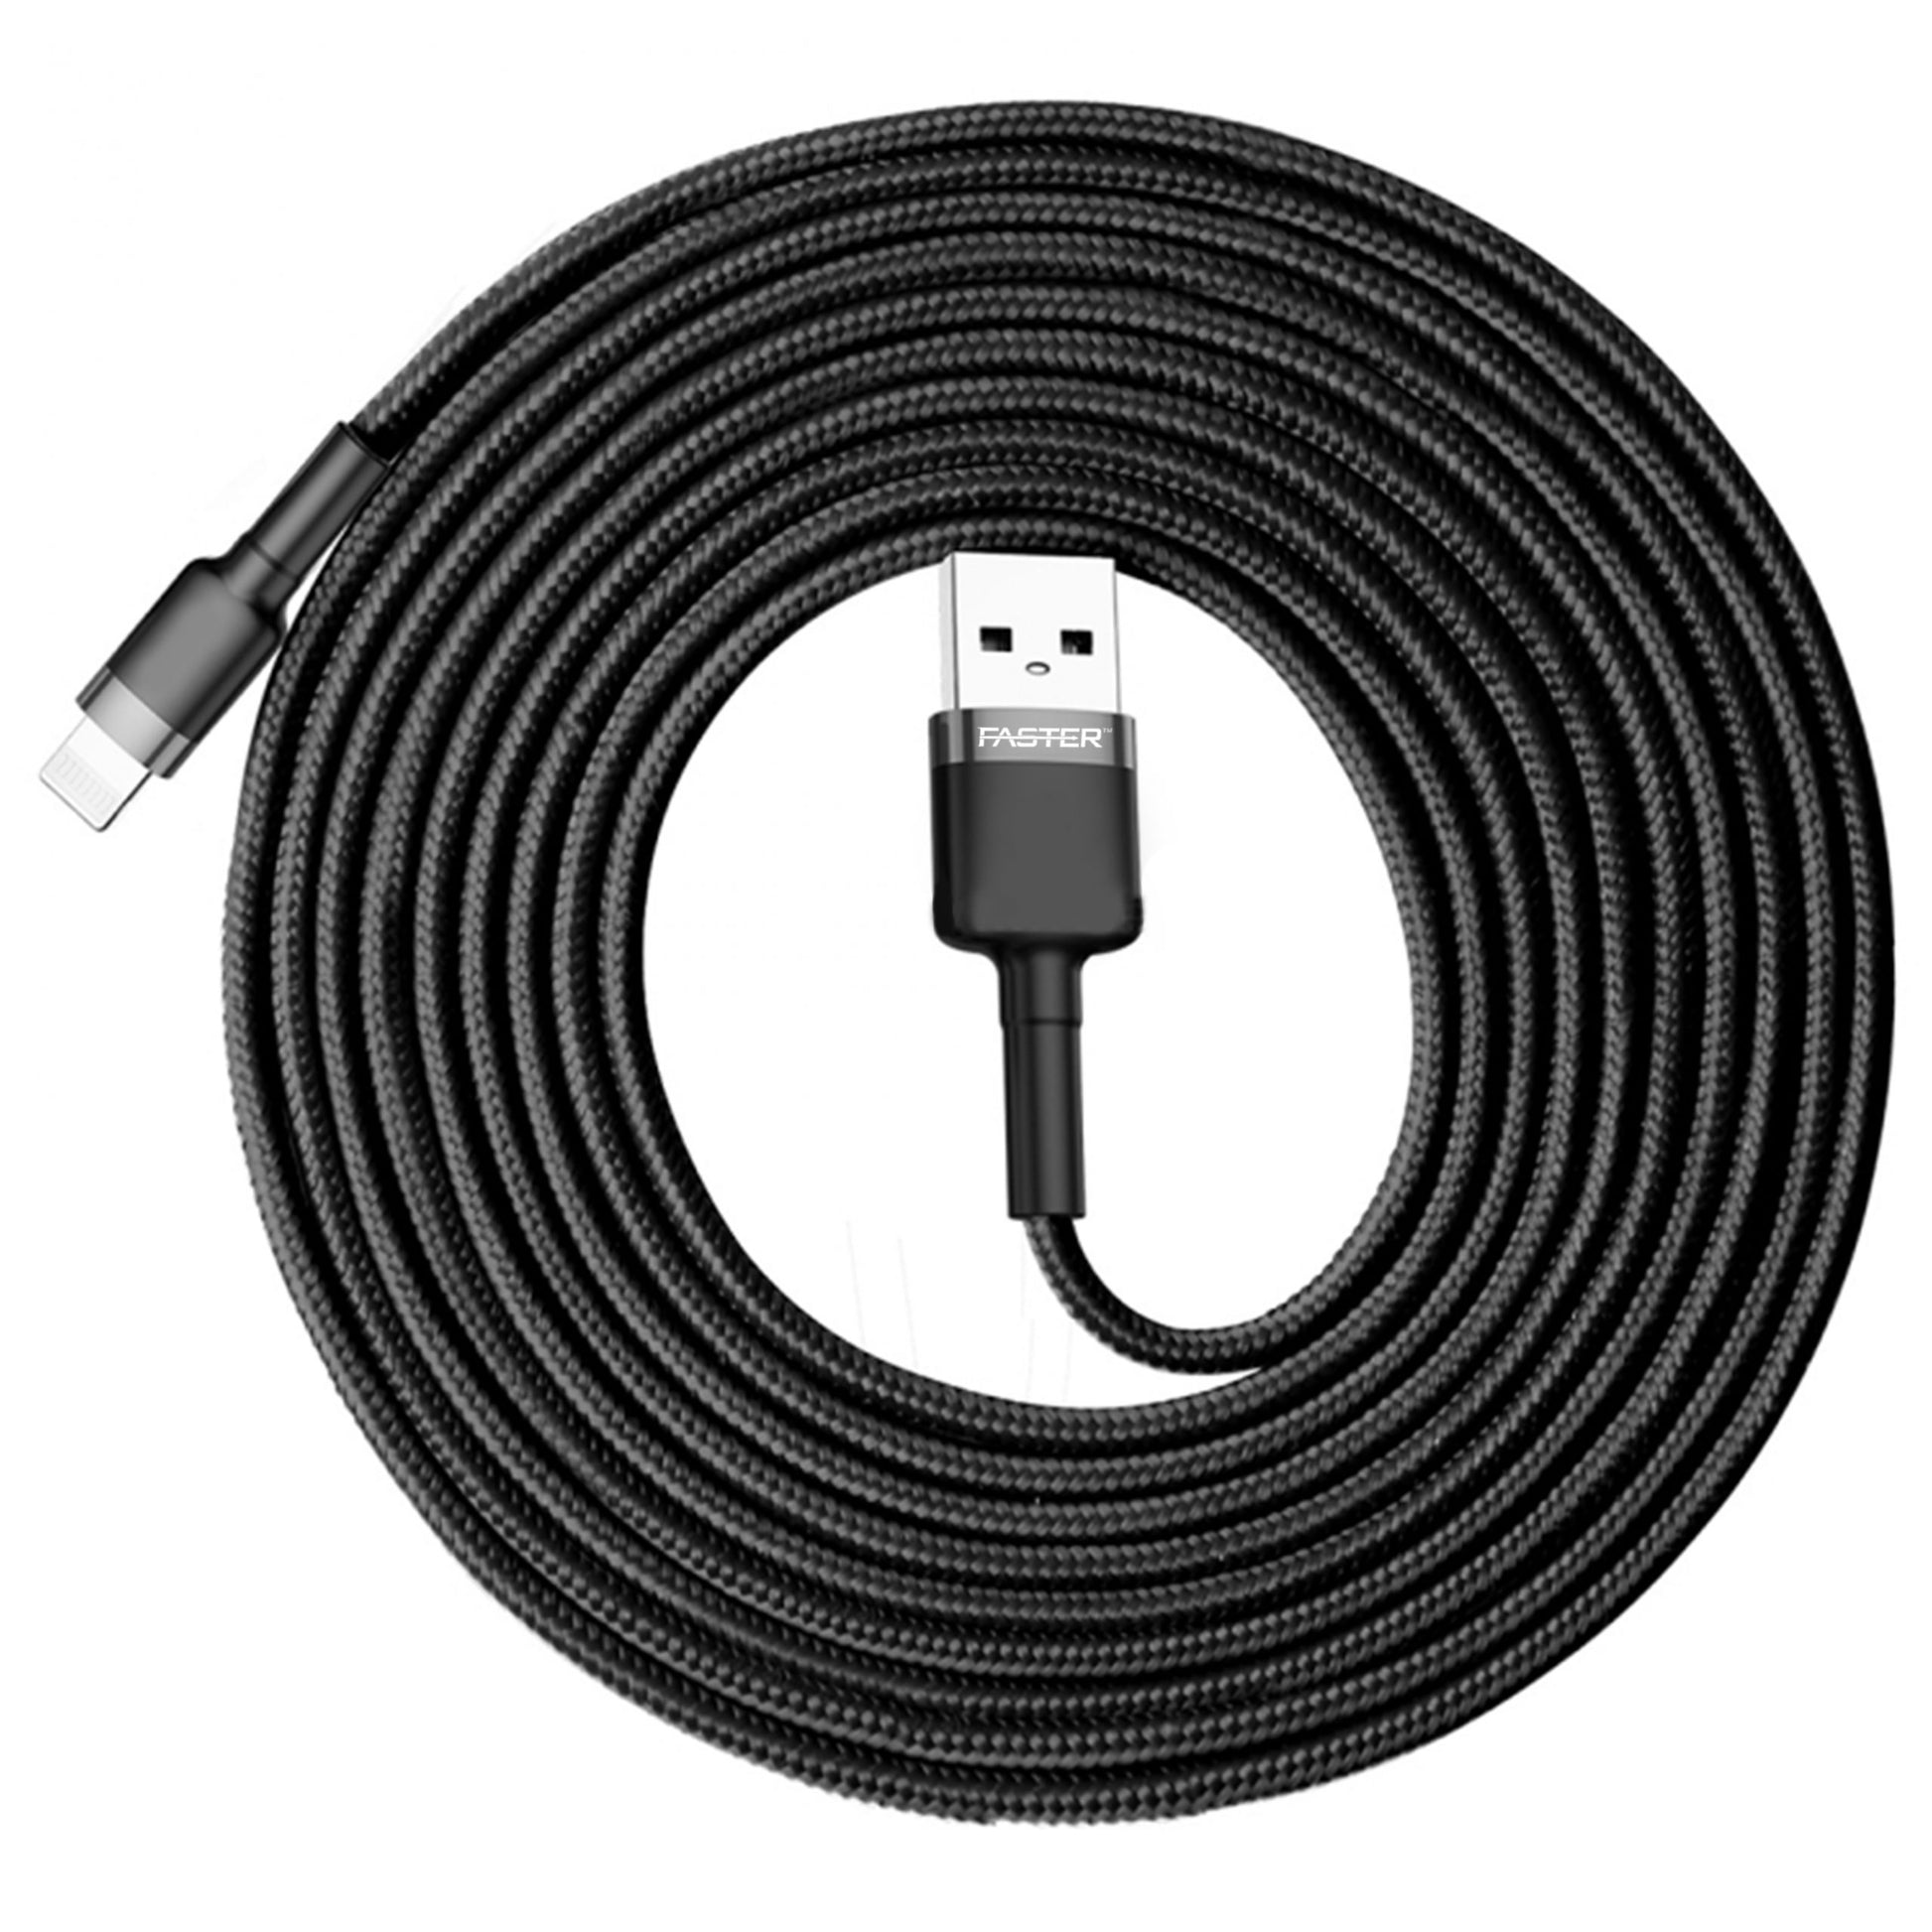 A Faster FC-06 Super Fast Charge Data Cable on white background